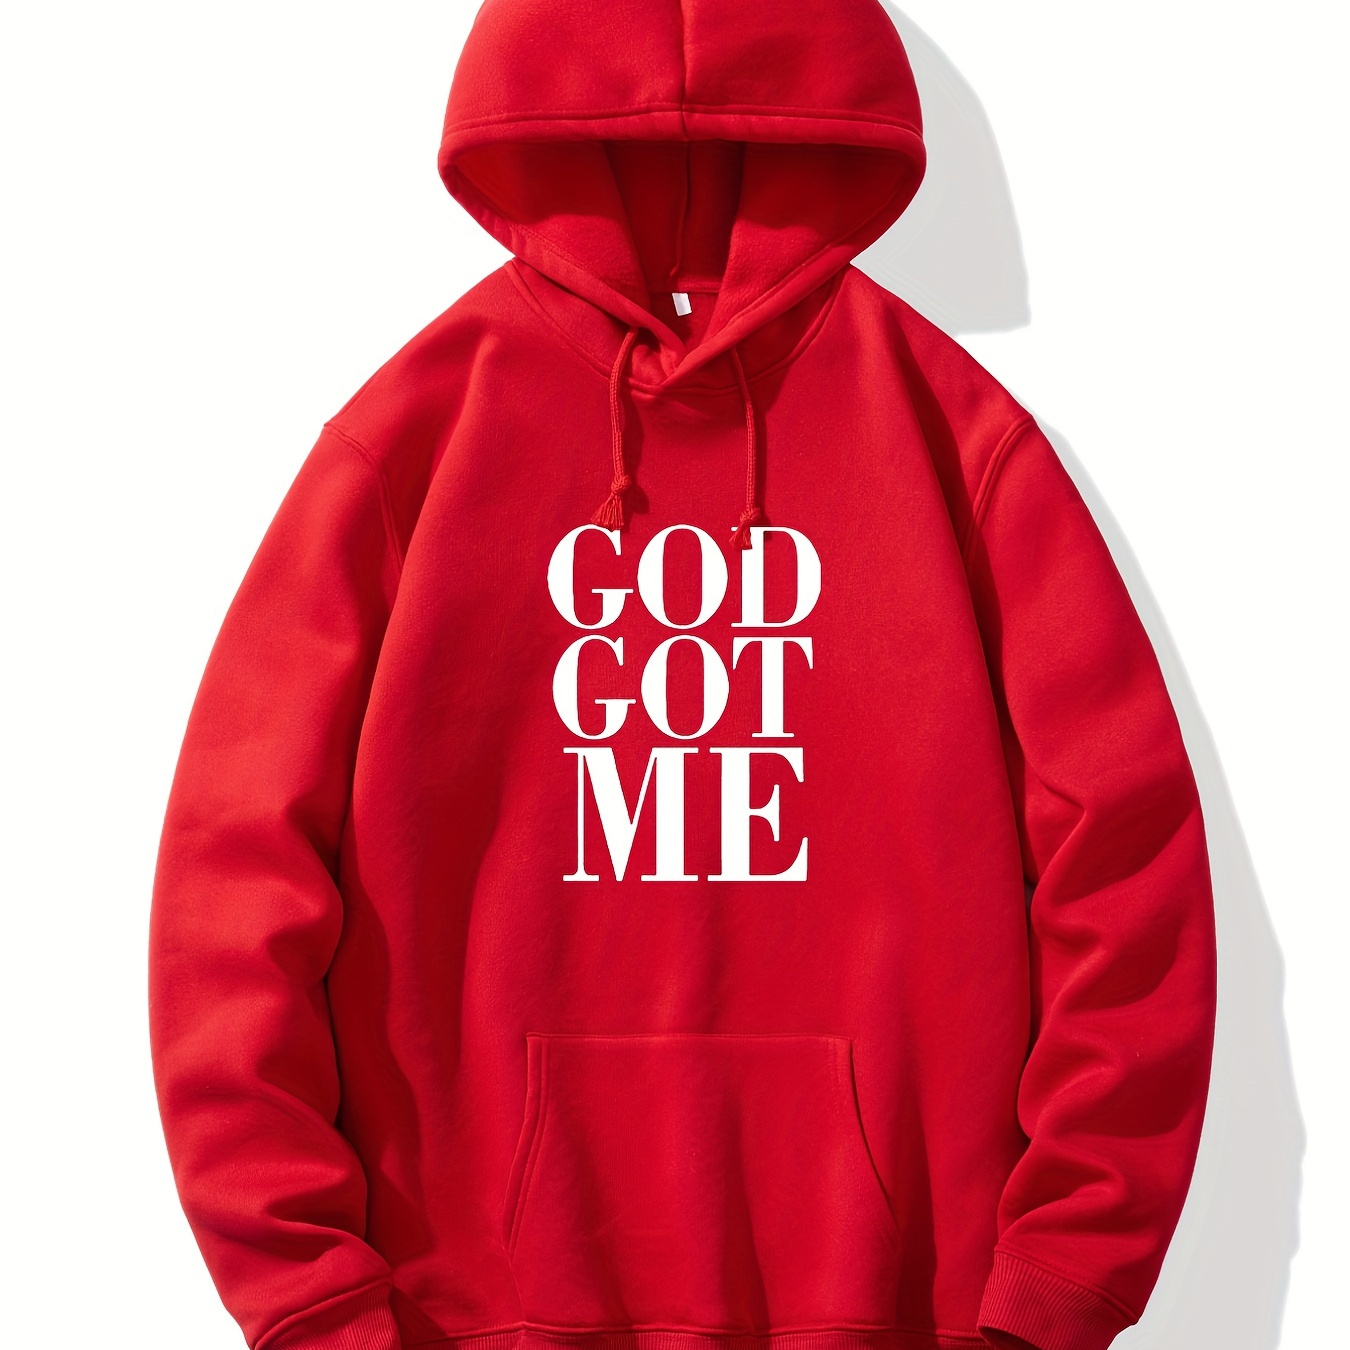 

God Got Me Print Hoodie, Hoodies Top For Men, Men’s Casual Pullover Hooded Graphic Design Sweatshirt With Kangaroo Pocket For Spring Fall, As Gifts